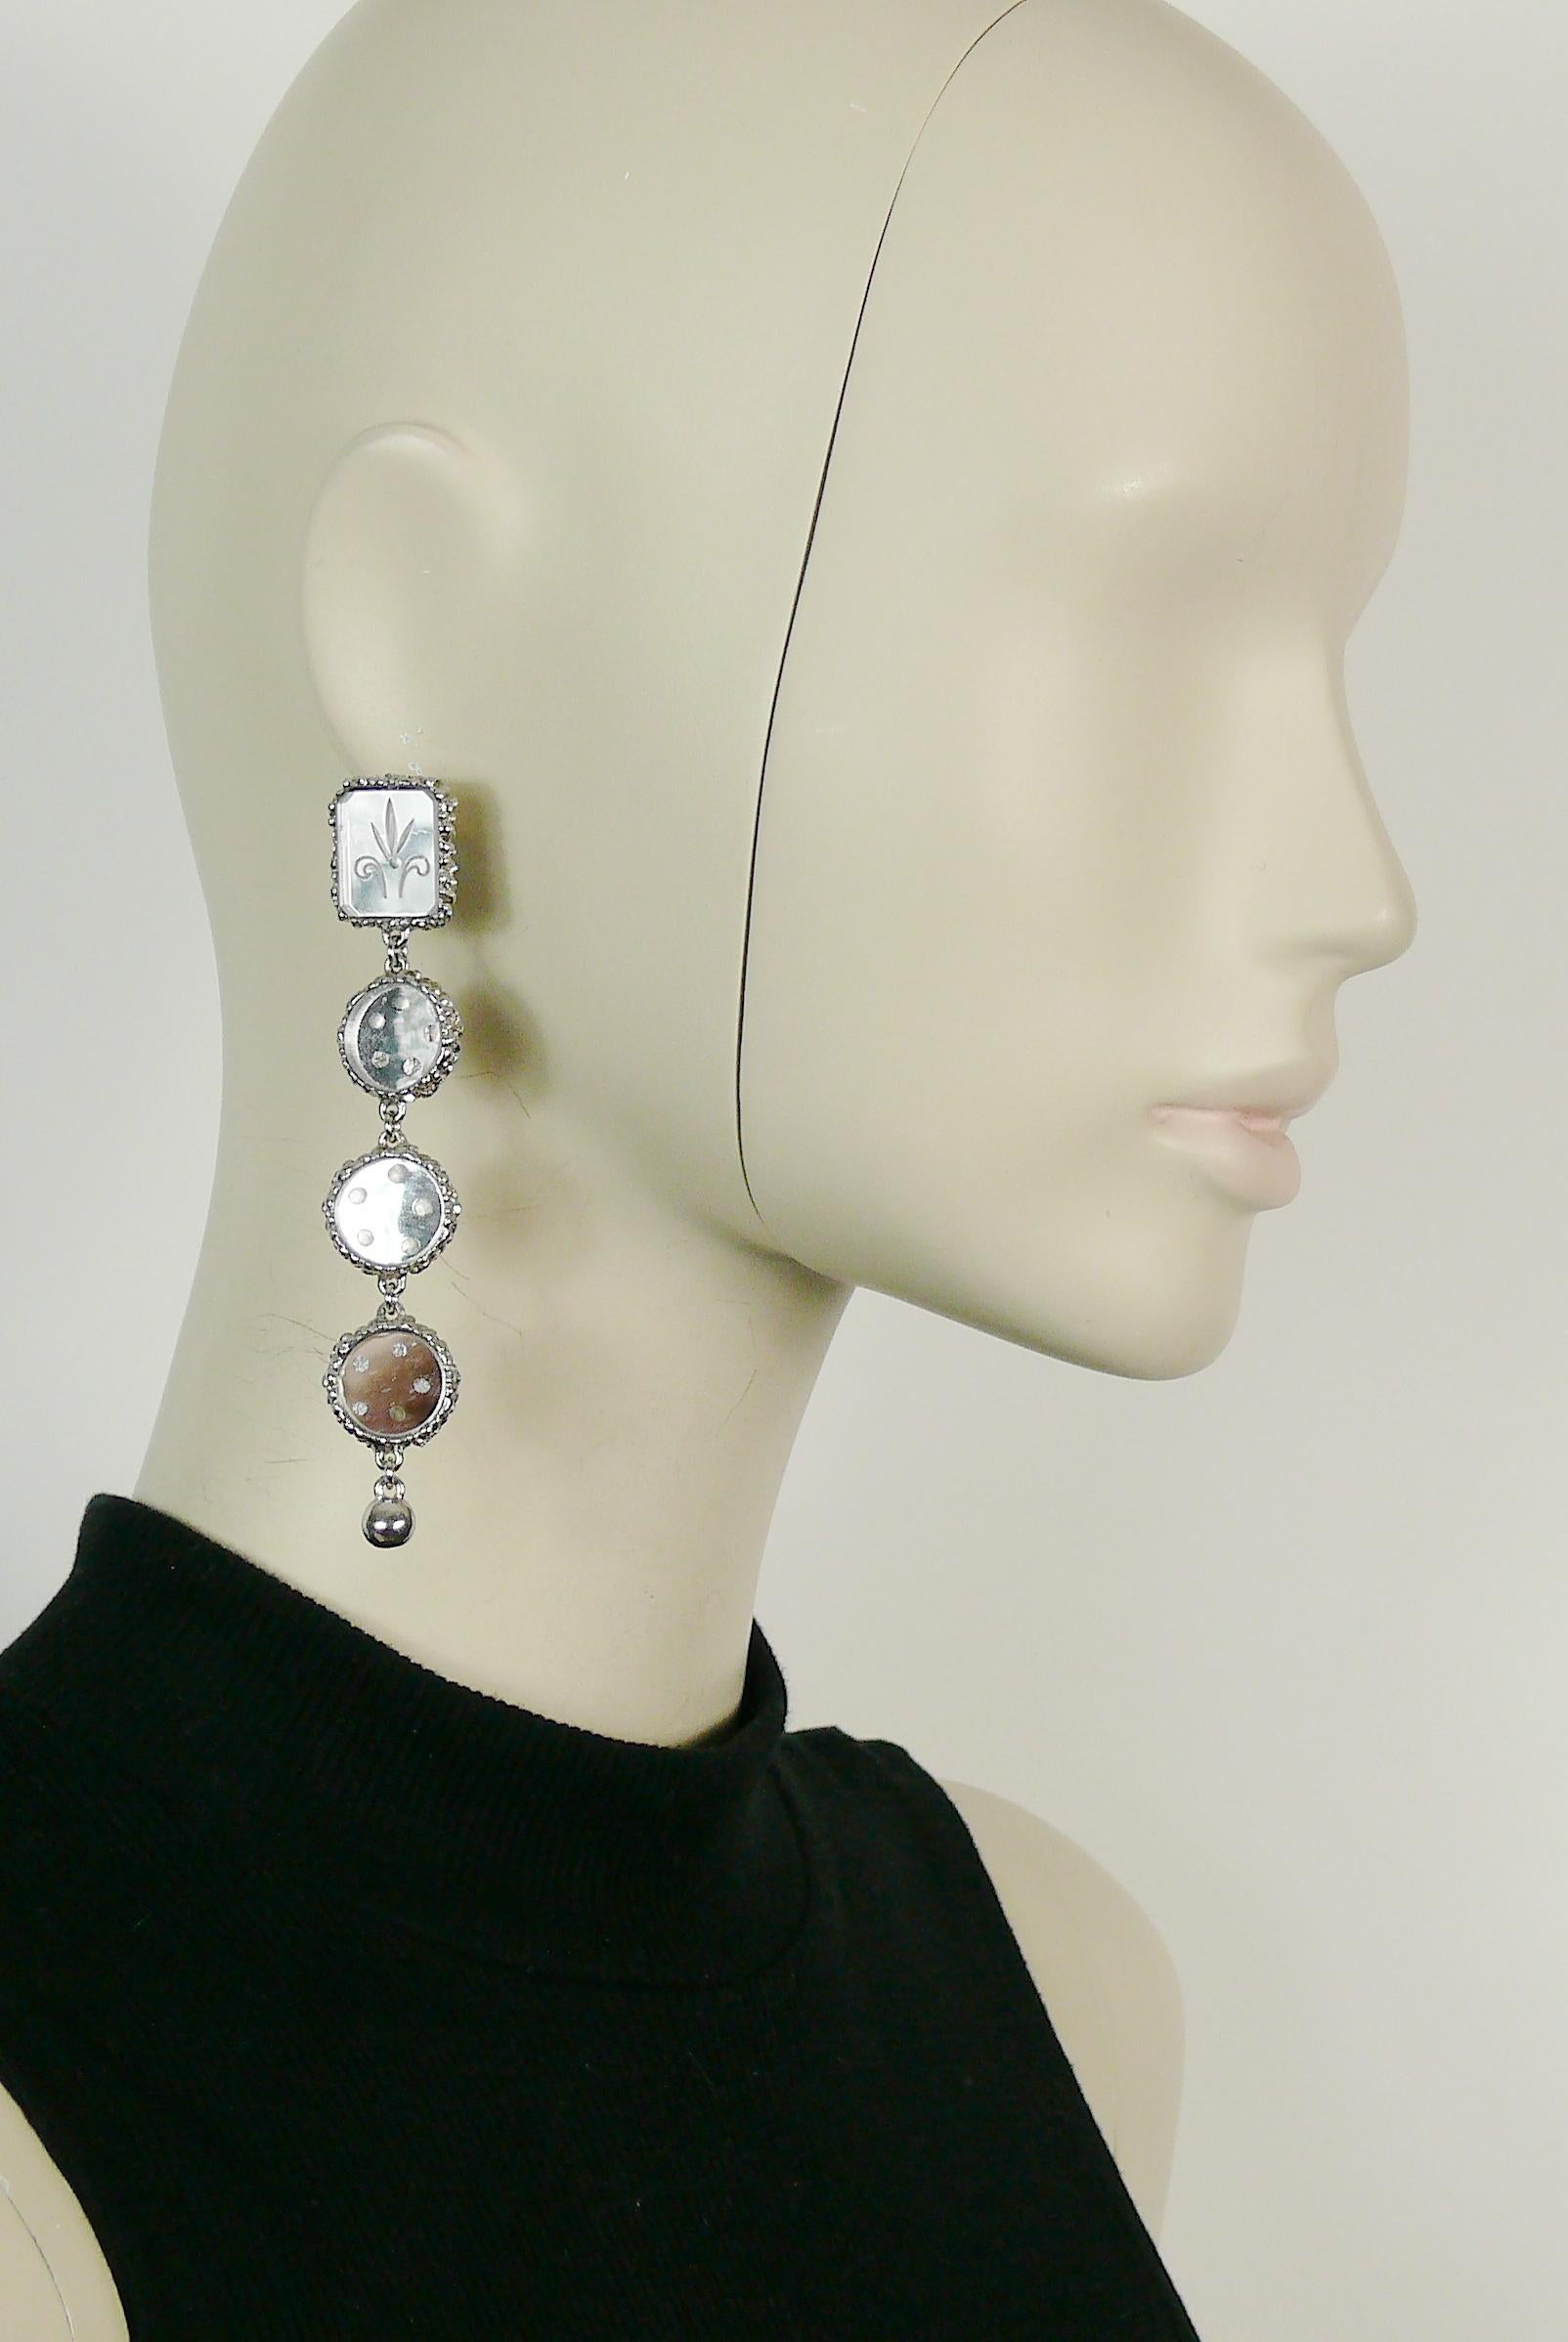 CHRISTIAN LACROIX vintage long silver toned Baroque Venetian mirror dangling earrings (clip-on).

Marked CHRISTIAN LACROIX CL Made in France.

Indicative measurements : length approx. 10.2 cm (4.02 inches) / max. width approx. 1.5 cm (0.59